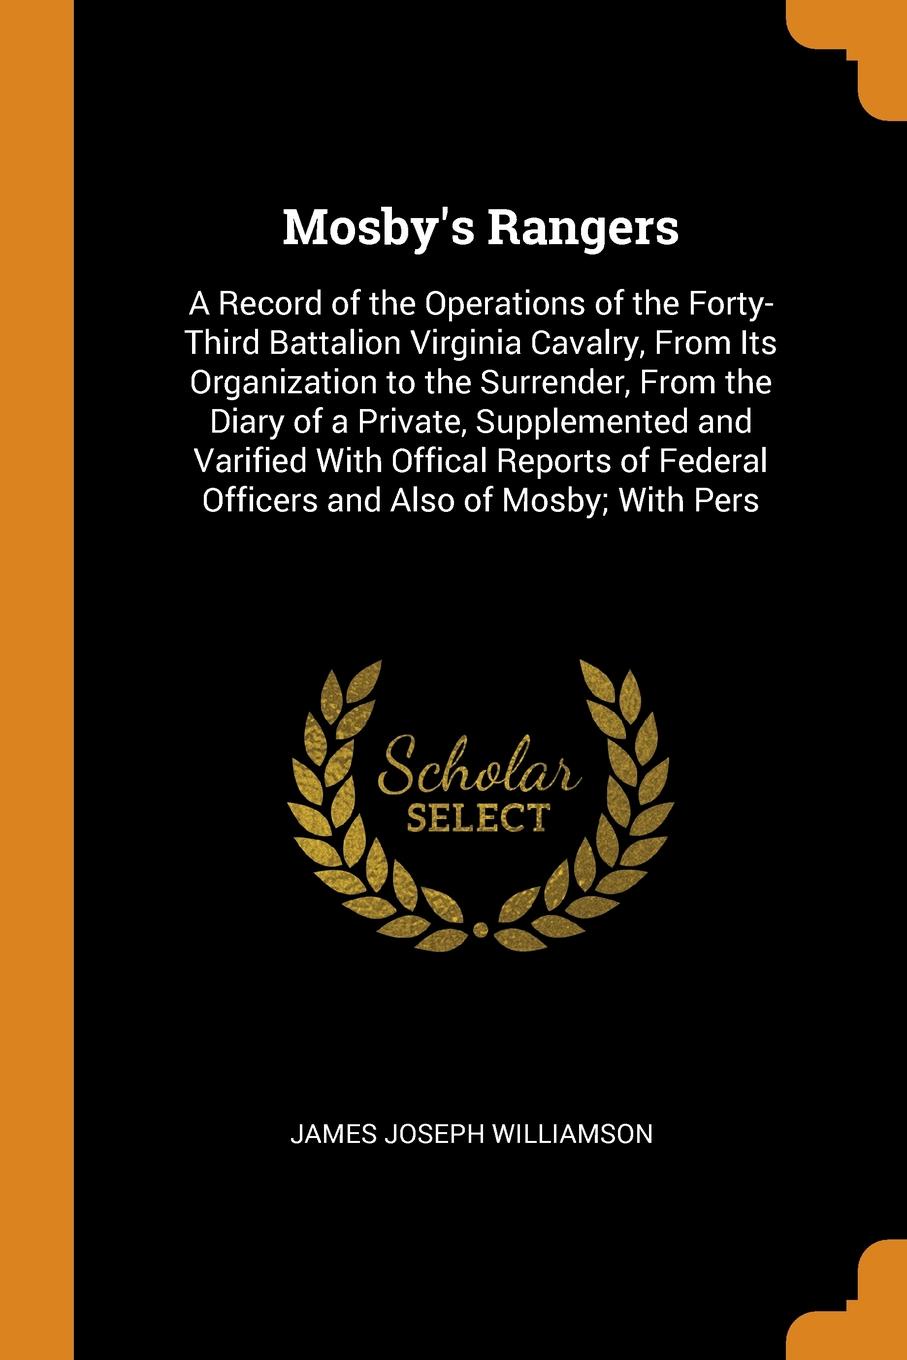 Mosby`s Rangers. A Record of the Operations of the Forty-Third Battalion Virginia Cavalry, From Its Organization to the Surrender, From the Diary of a Private, Supplemented and Varified With Offical Reports of Federal Officers and Also of Mosby; W...